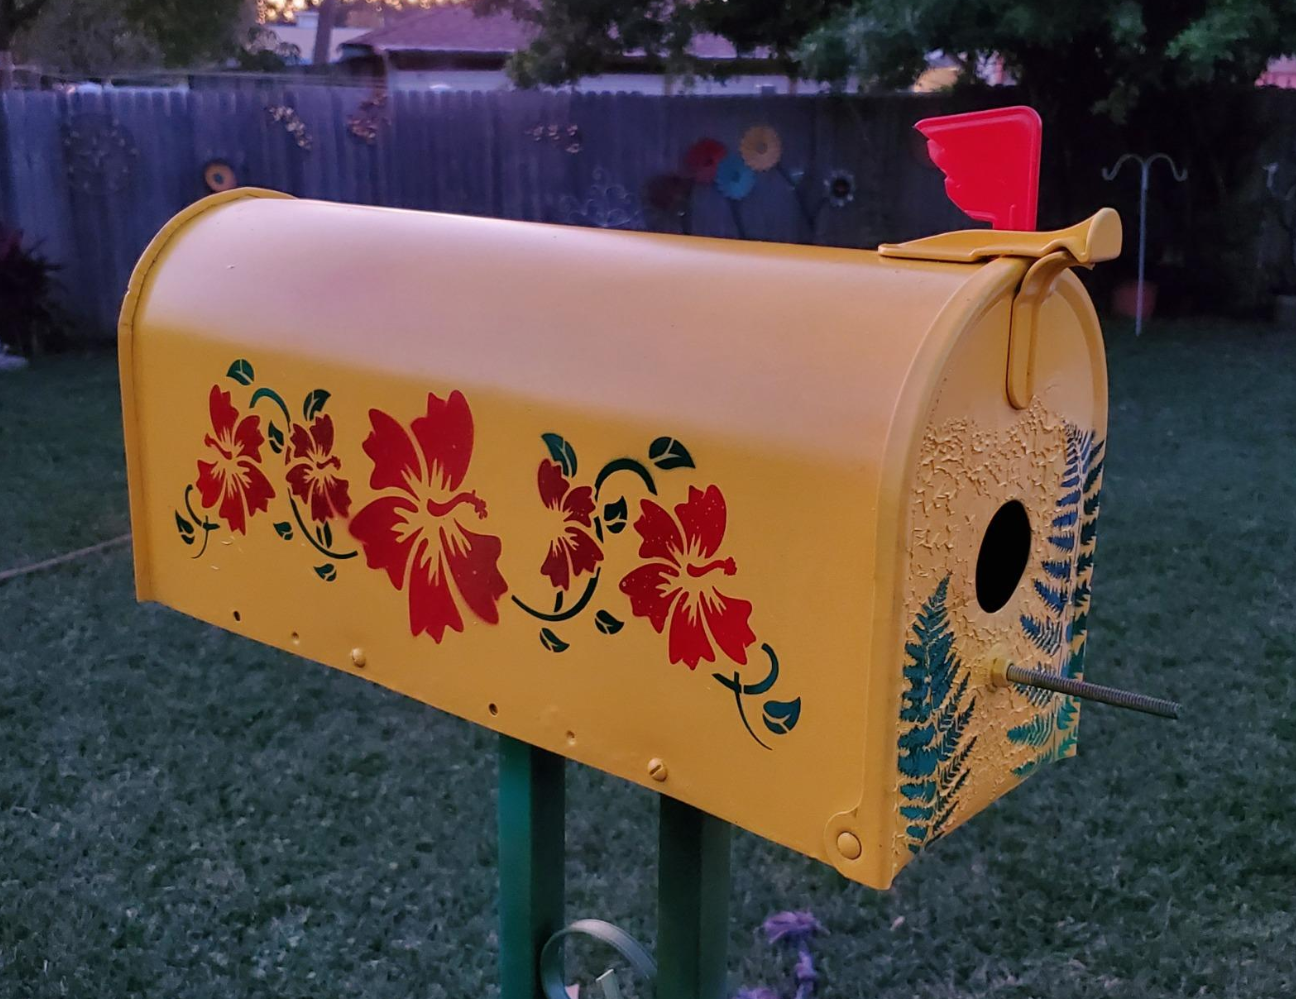 hibiscus flowers painted on a mailbox